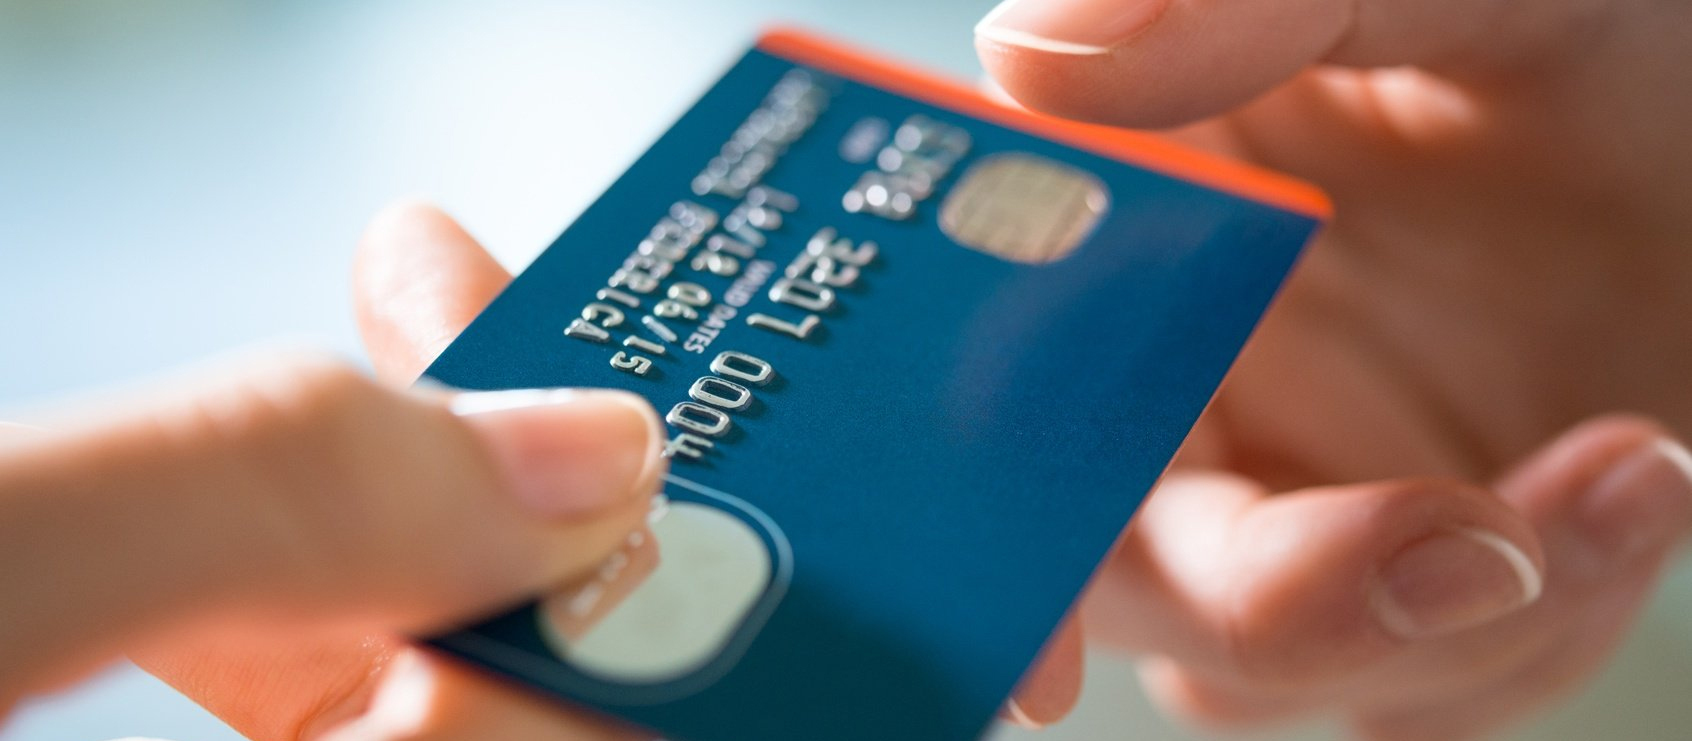 Major Credit Card Company Increases Cardholder Spend With National Merchant Value